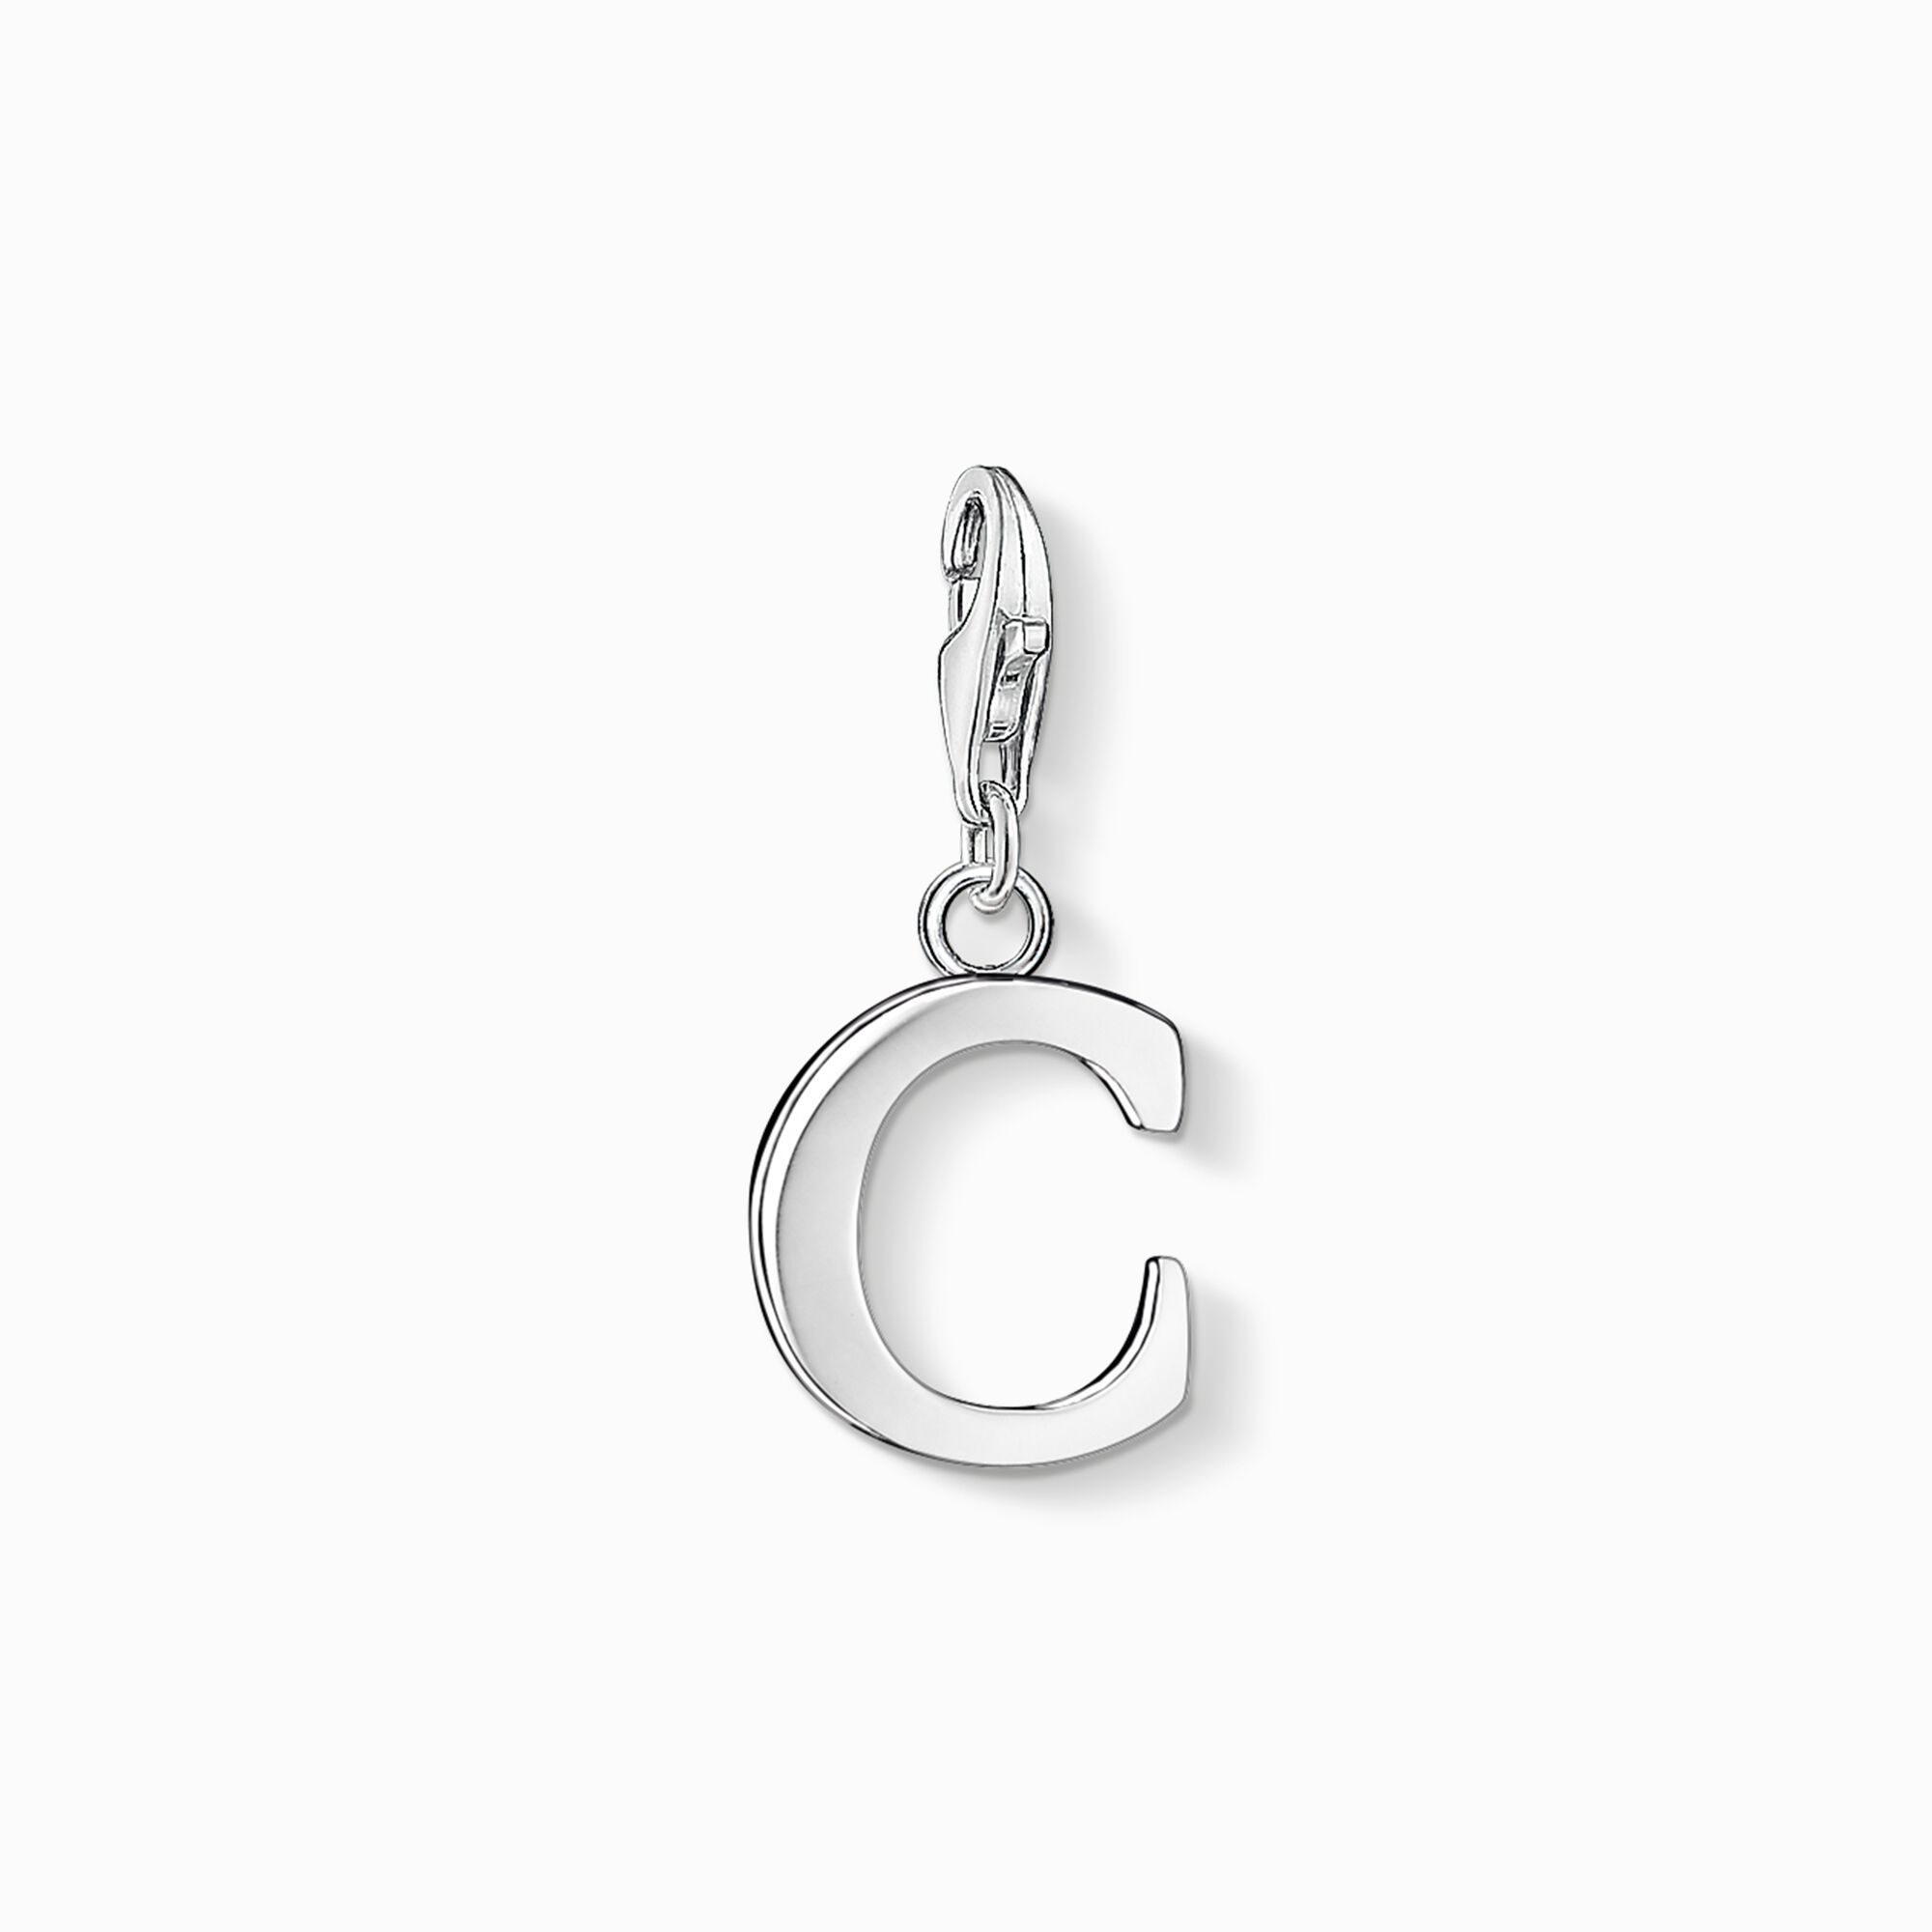 Charm pendant letter C from the Charm Club collection in the THOMAS SABO online store